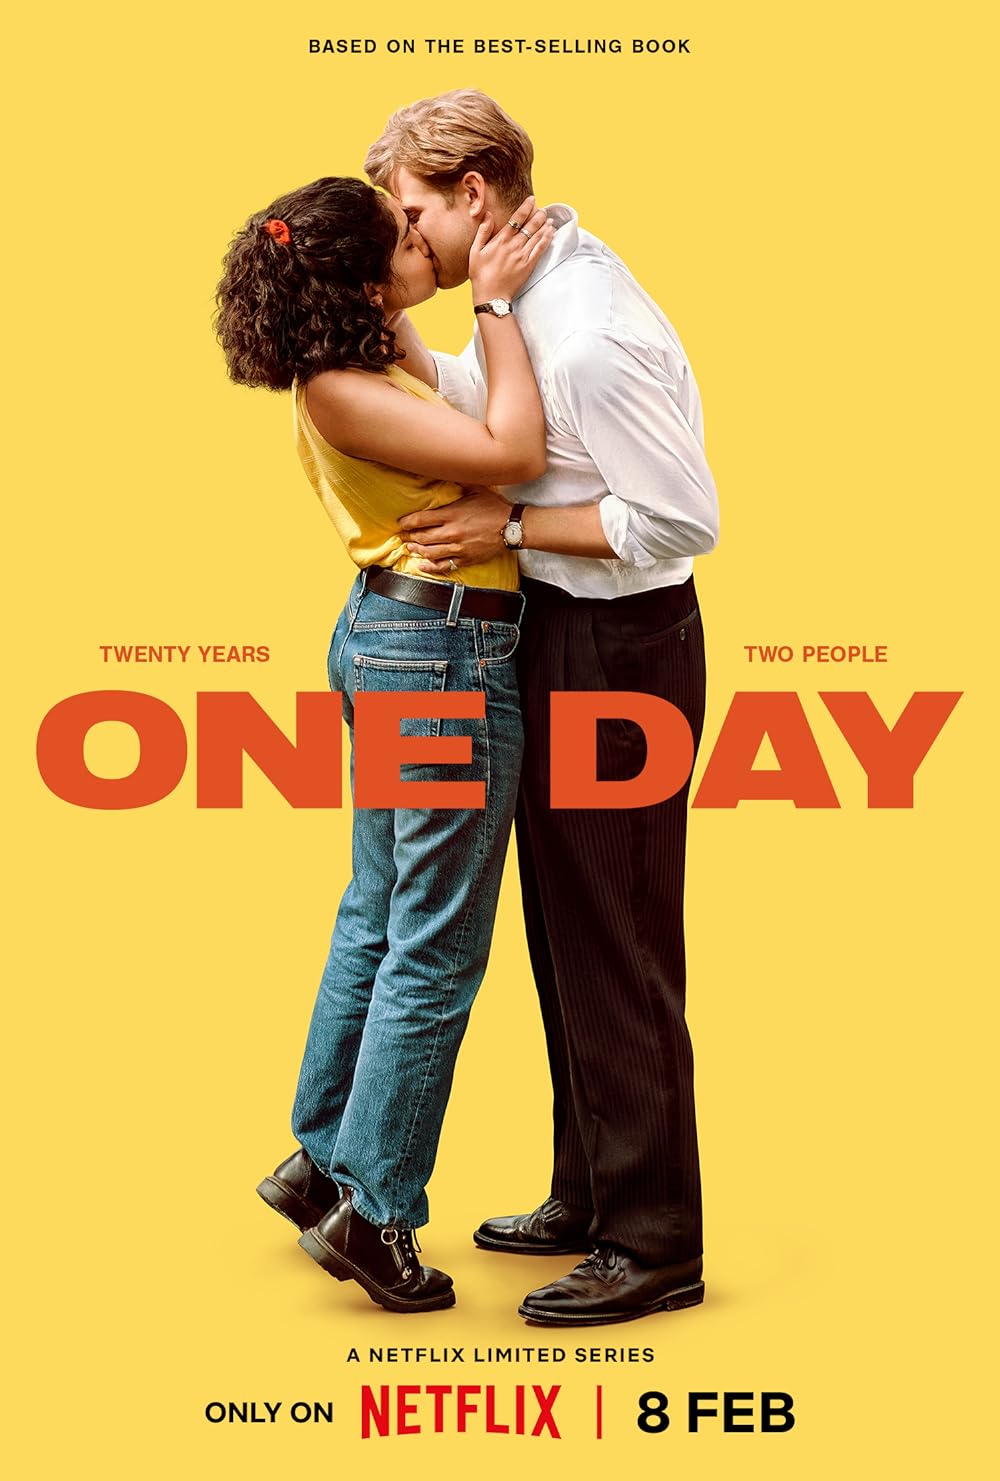 One Day (February 8) - Streaming on NetflixOne Day adapts David Nicholls’s renowned novel, capturing the decades-spanning love story of Emma Morley (Ambika Mod) and Dexter Mayhew (Leo Woodall). Beginning on July 15, 1988, the night of their university graduation, the series revisits the pair on the same day, year after year, charting their joys, heartbreaks, growth, and the evolving dynamics of their bond.